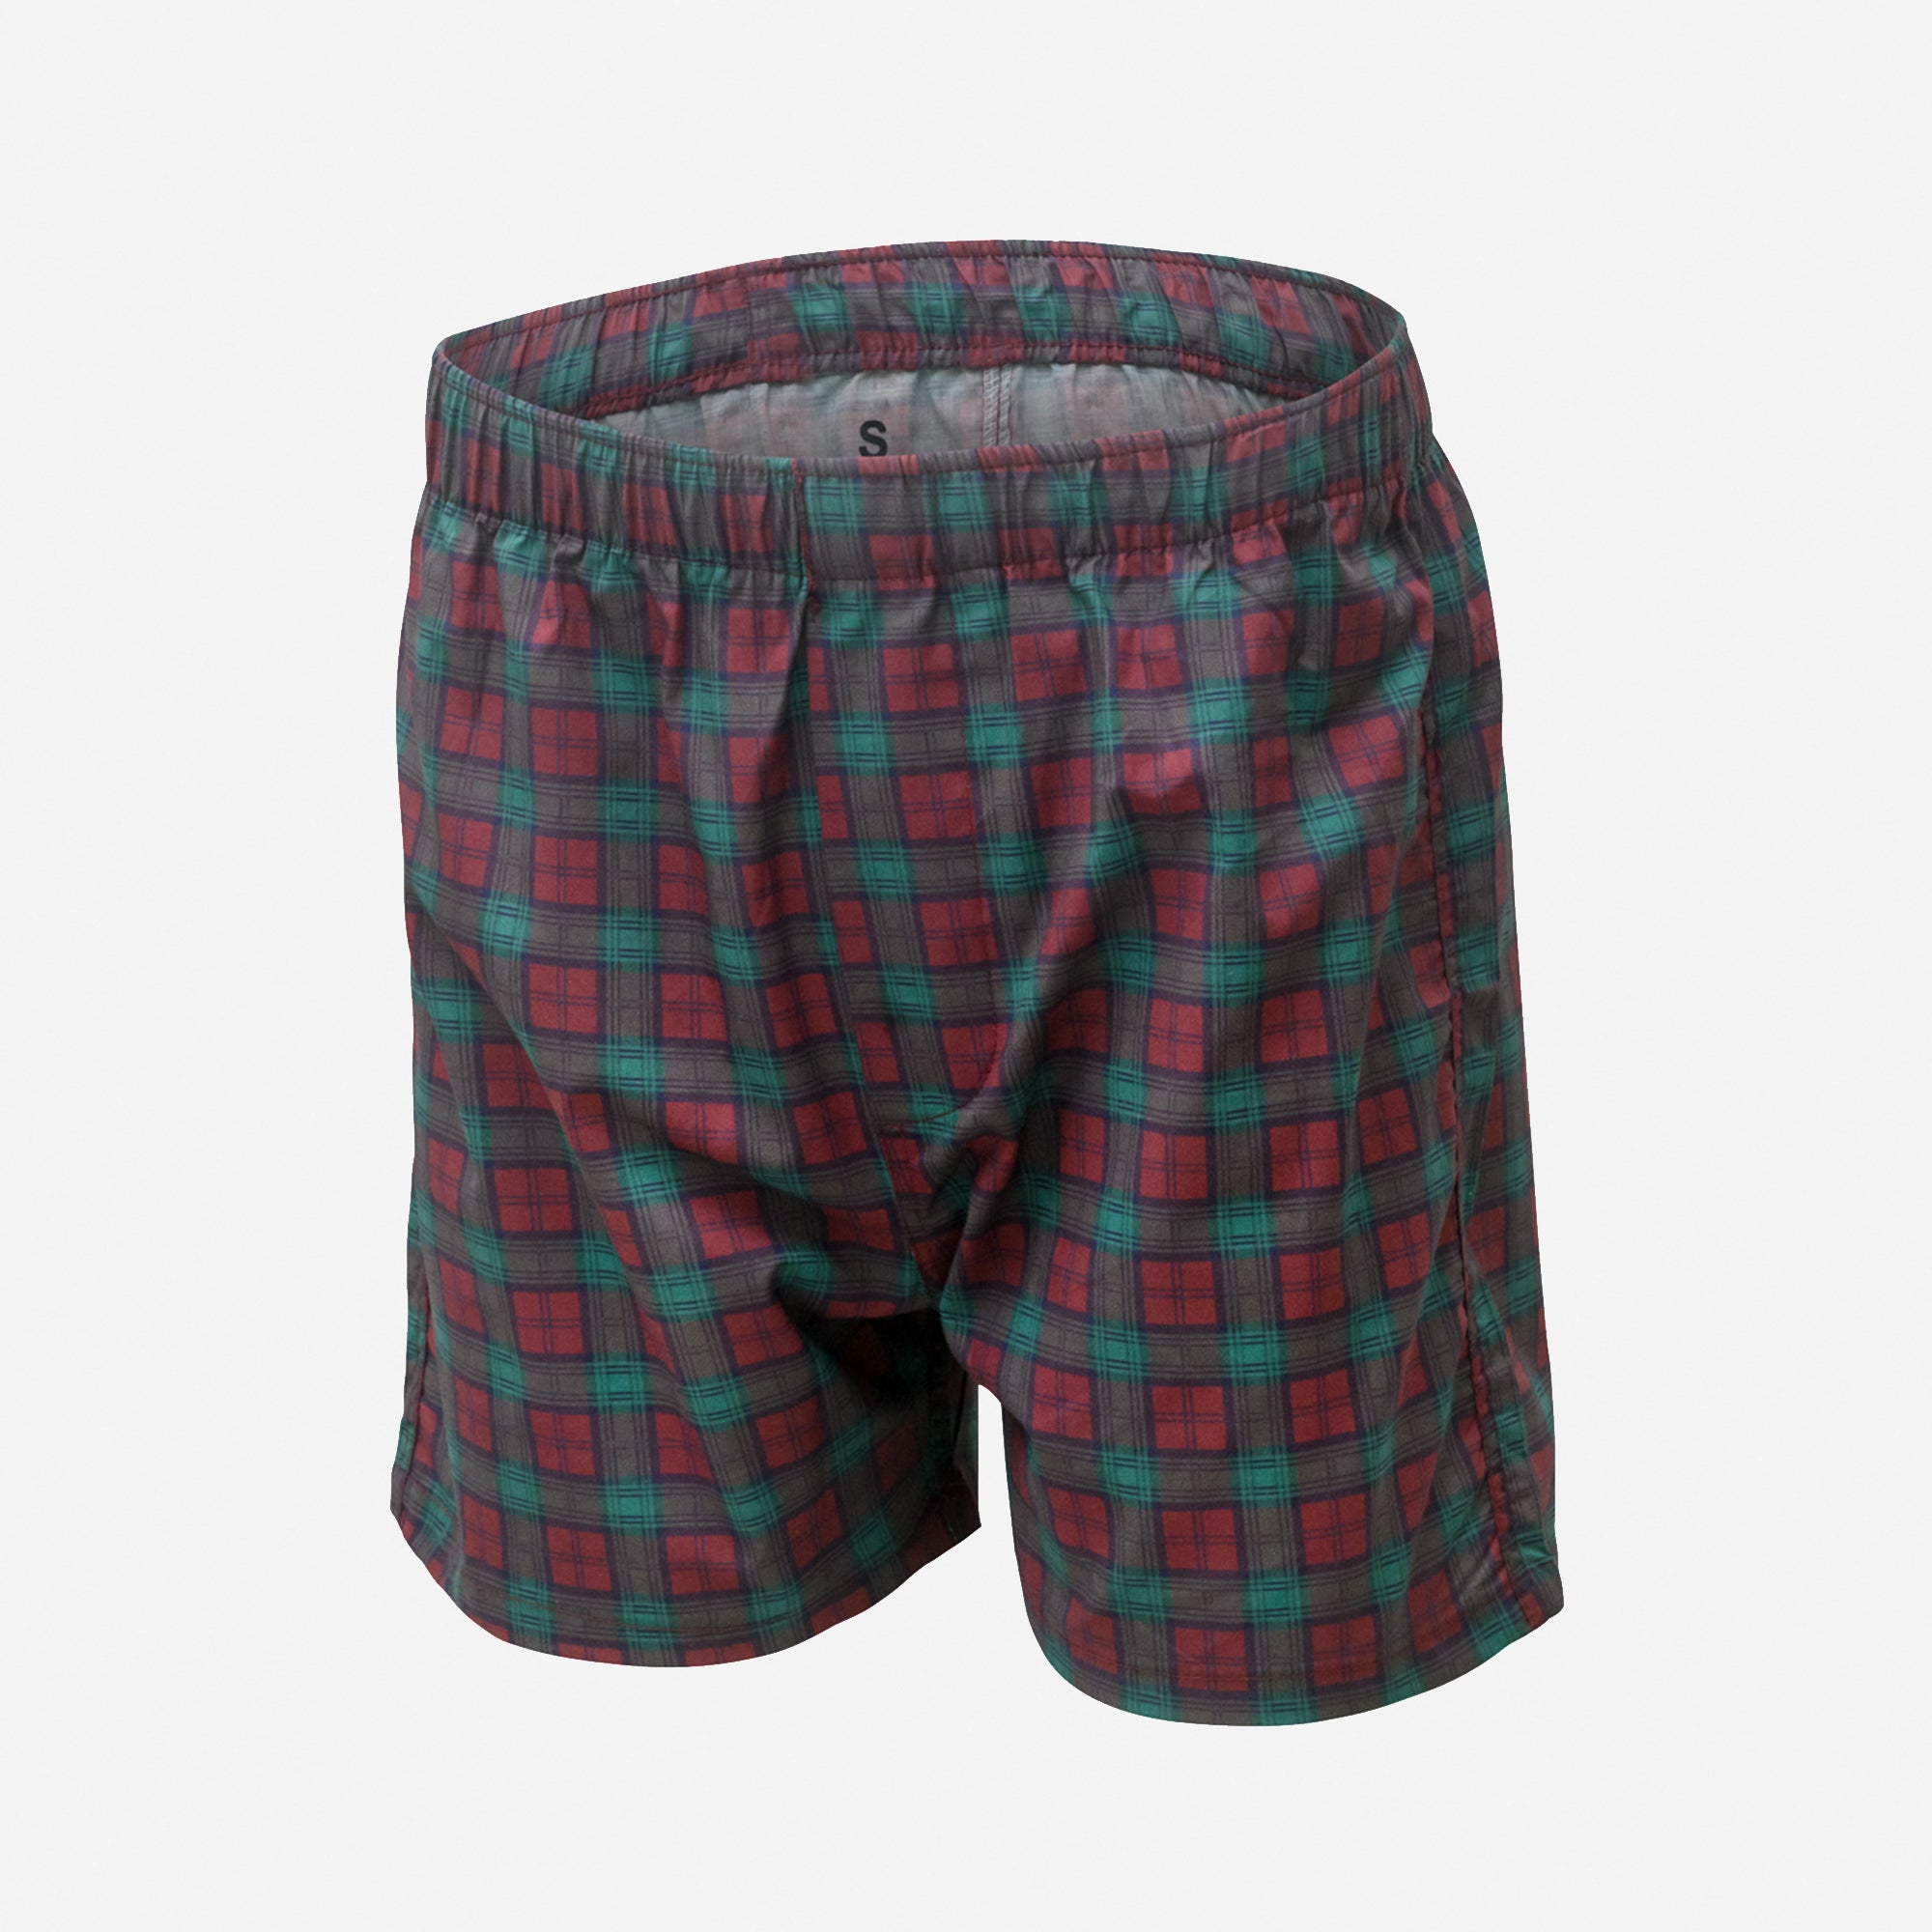 Men's 100% Cotton Boxer Shorts Waistband Check Print Boxers -Pack of 4